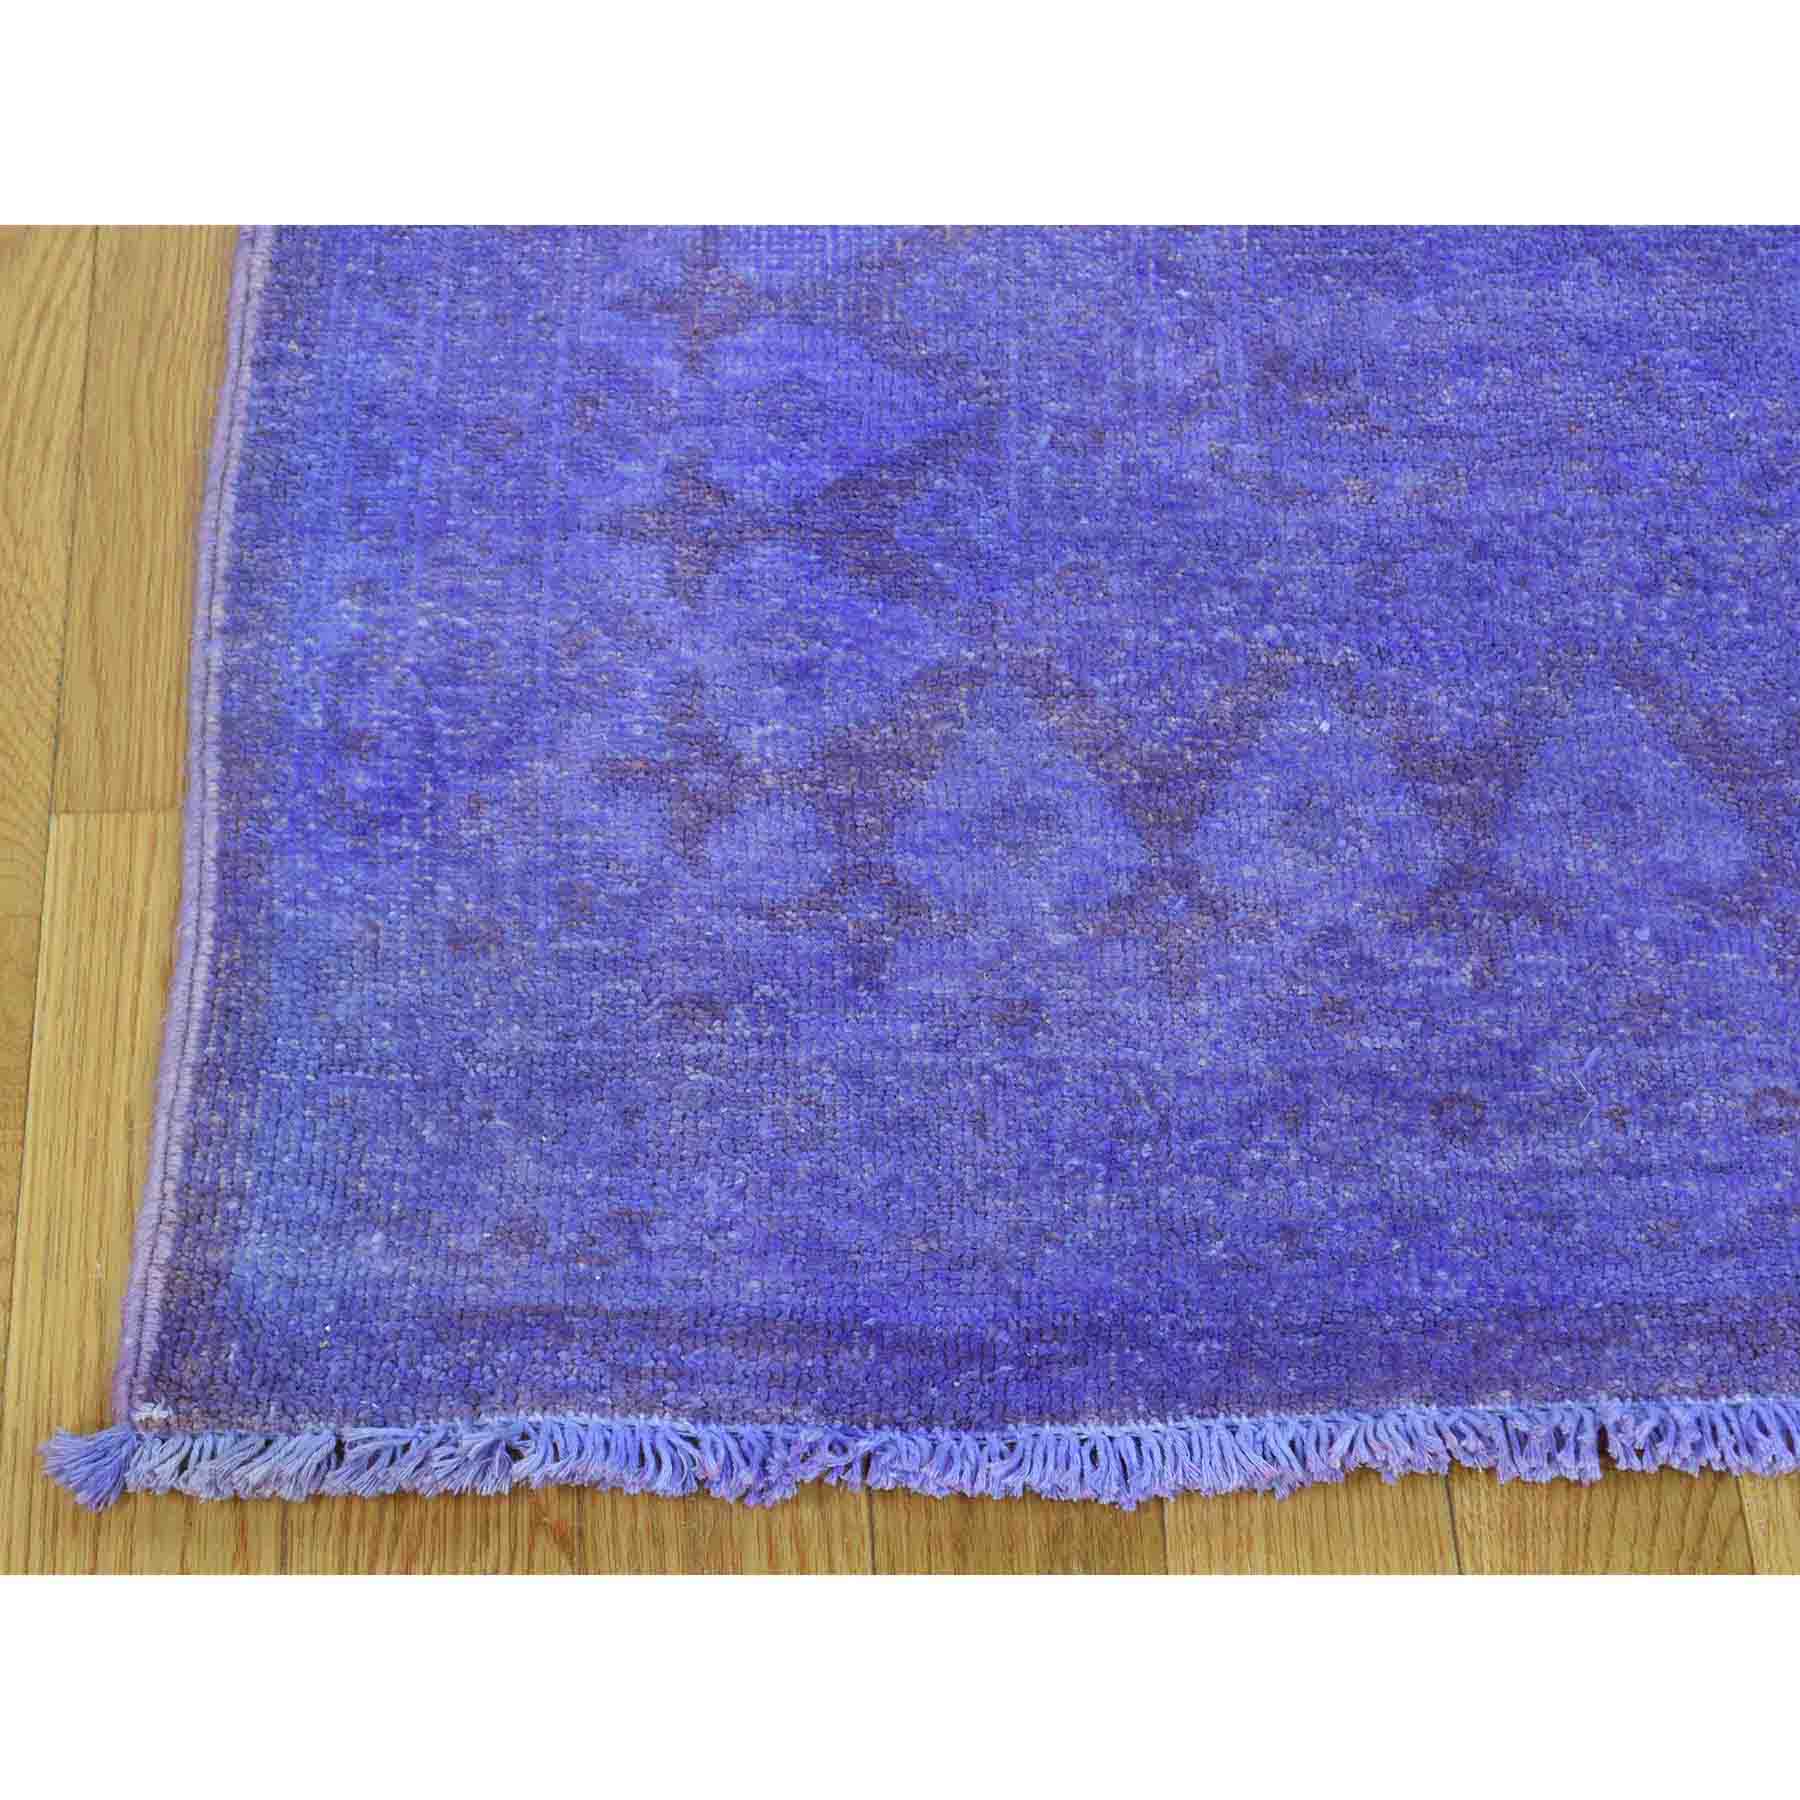 Overdyed-Vintage-Hand-Knotted-Rug-182685